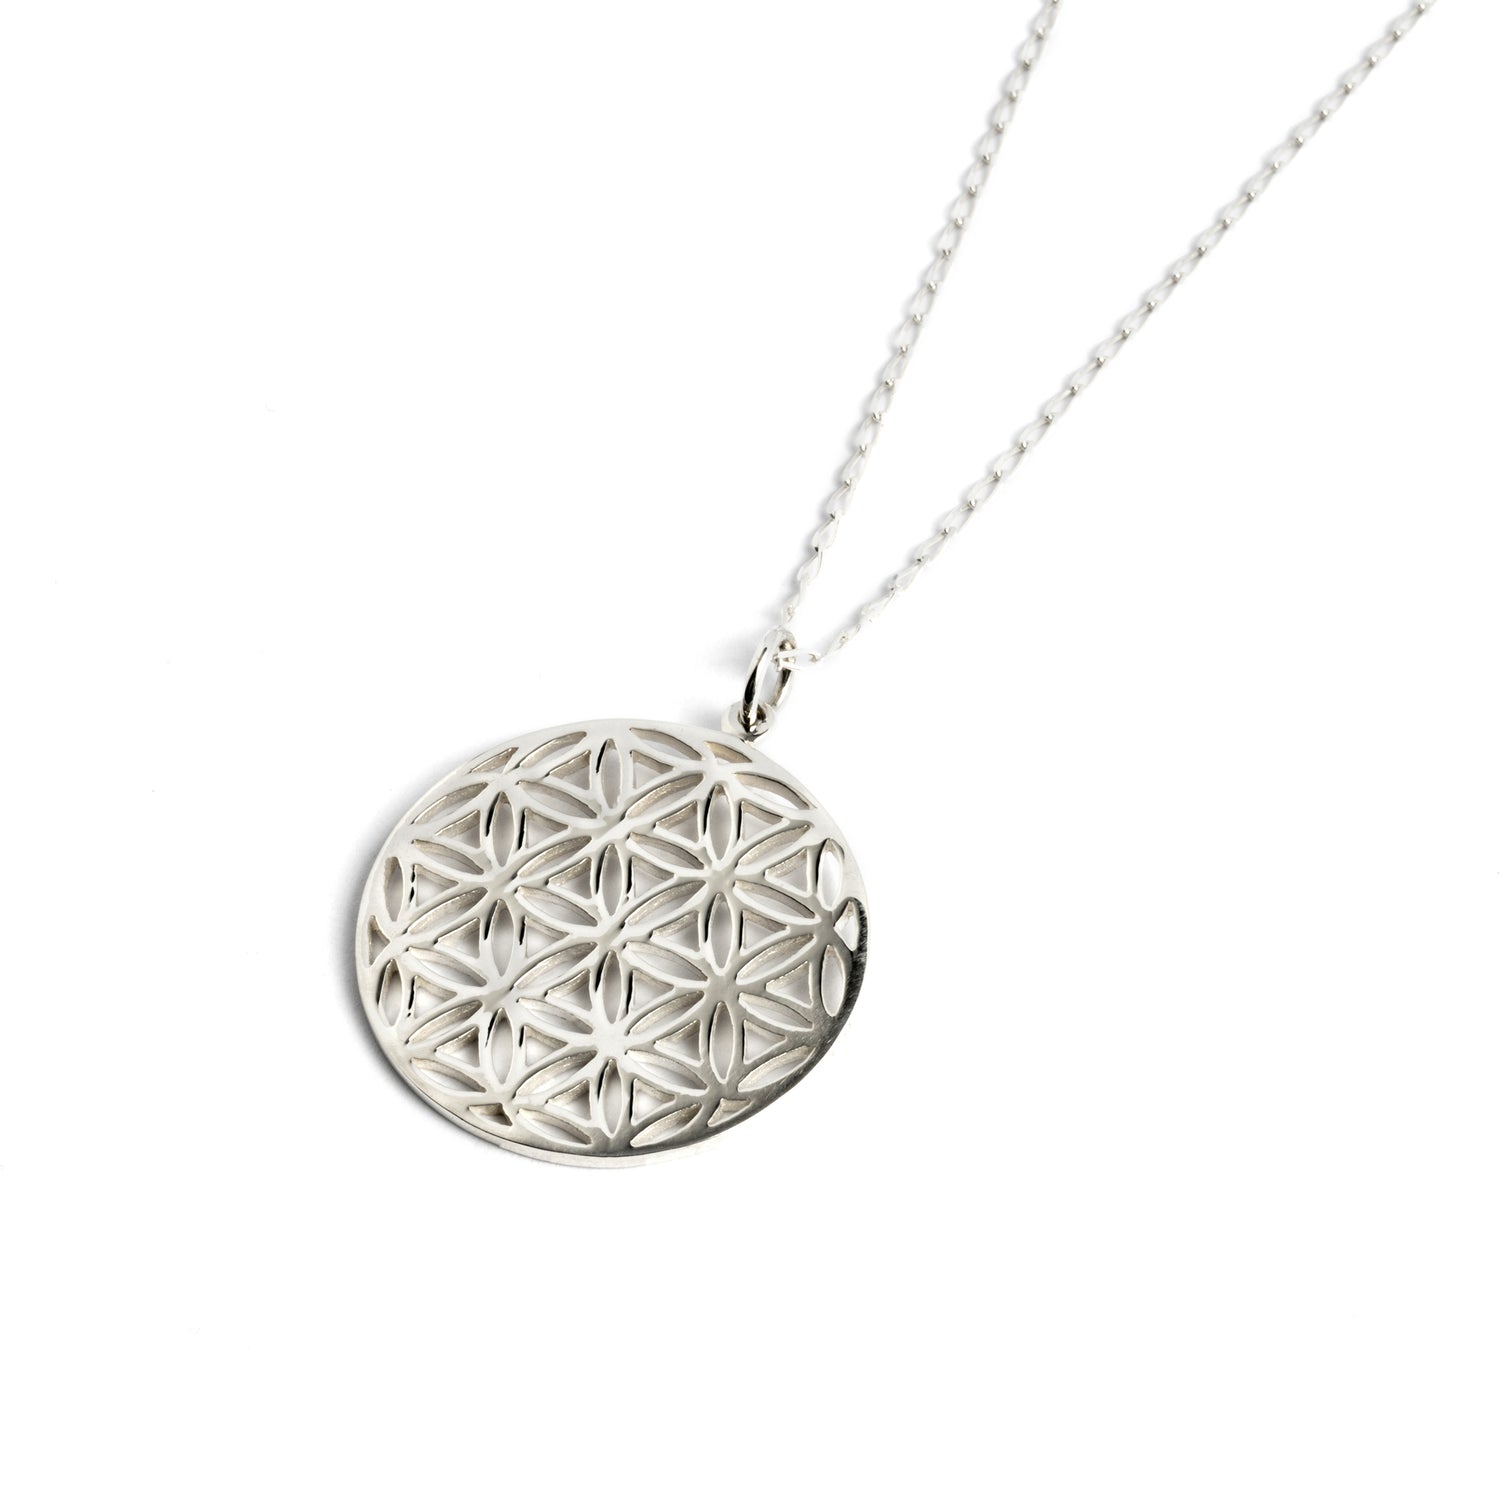 Flower of Life Charm Necklace right side view